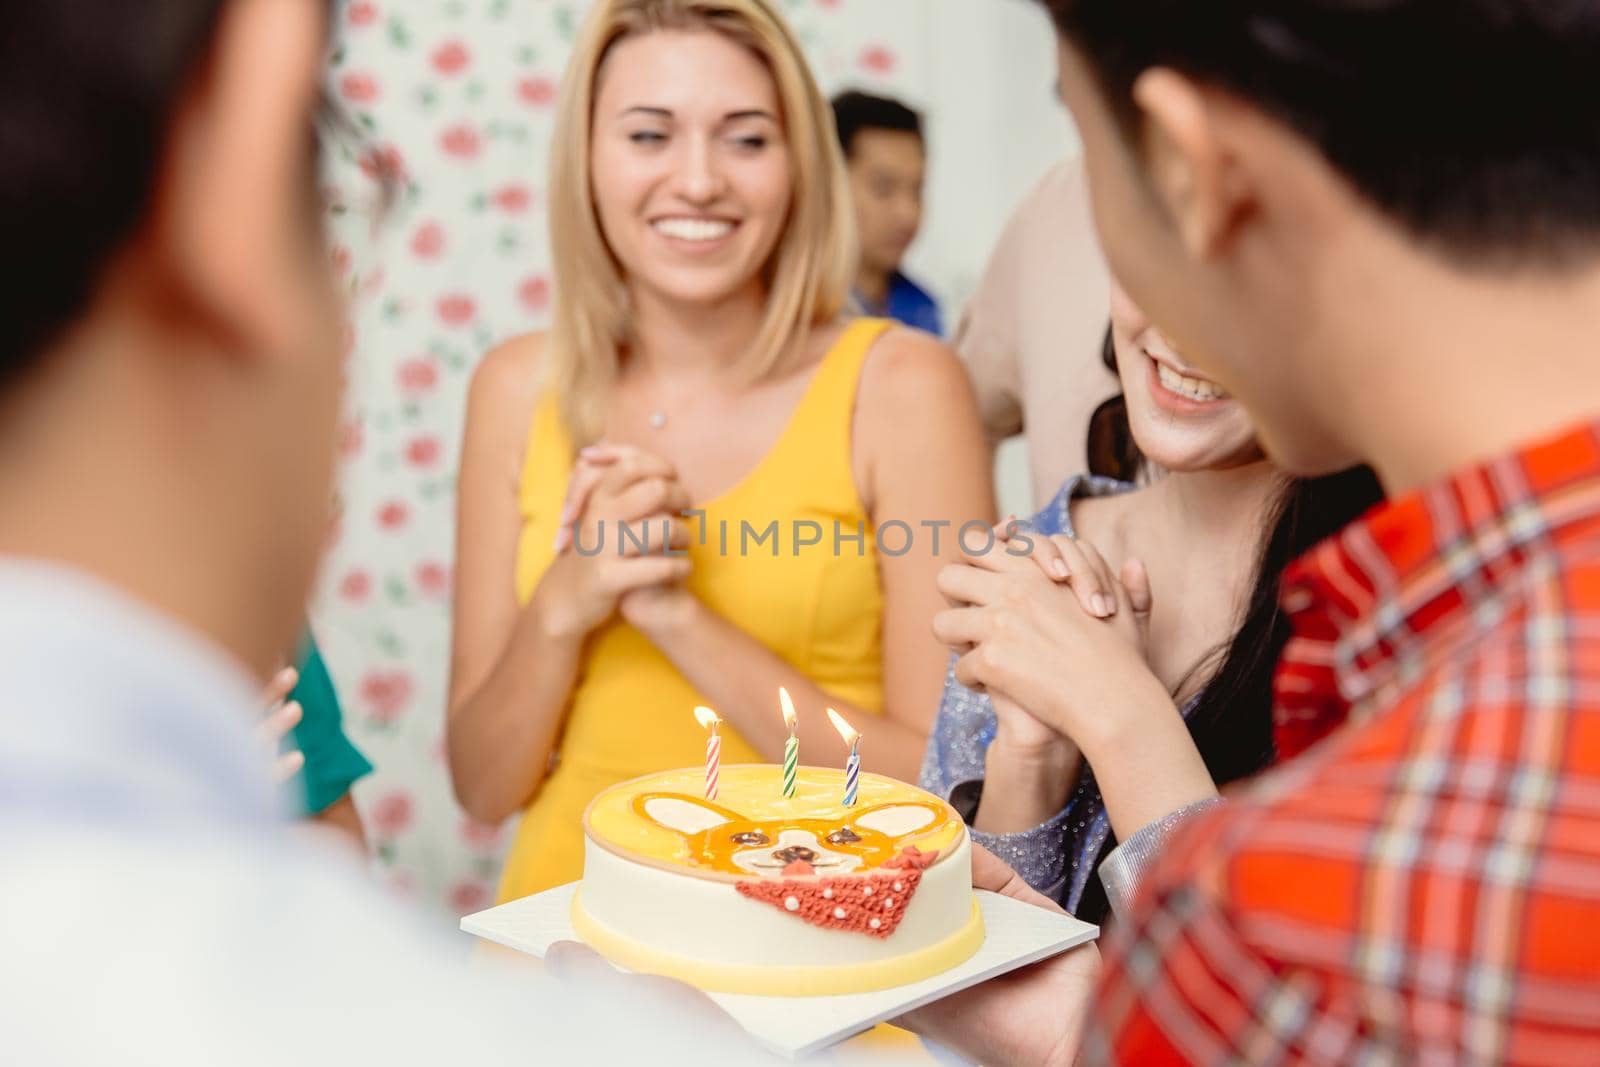 Happiness moment birthday party cake with candle woman and friends enjoy smiling, selective focus at birthday cake candle. by qualitystocks